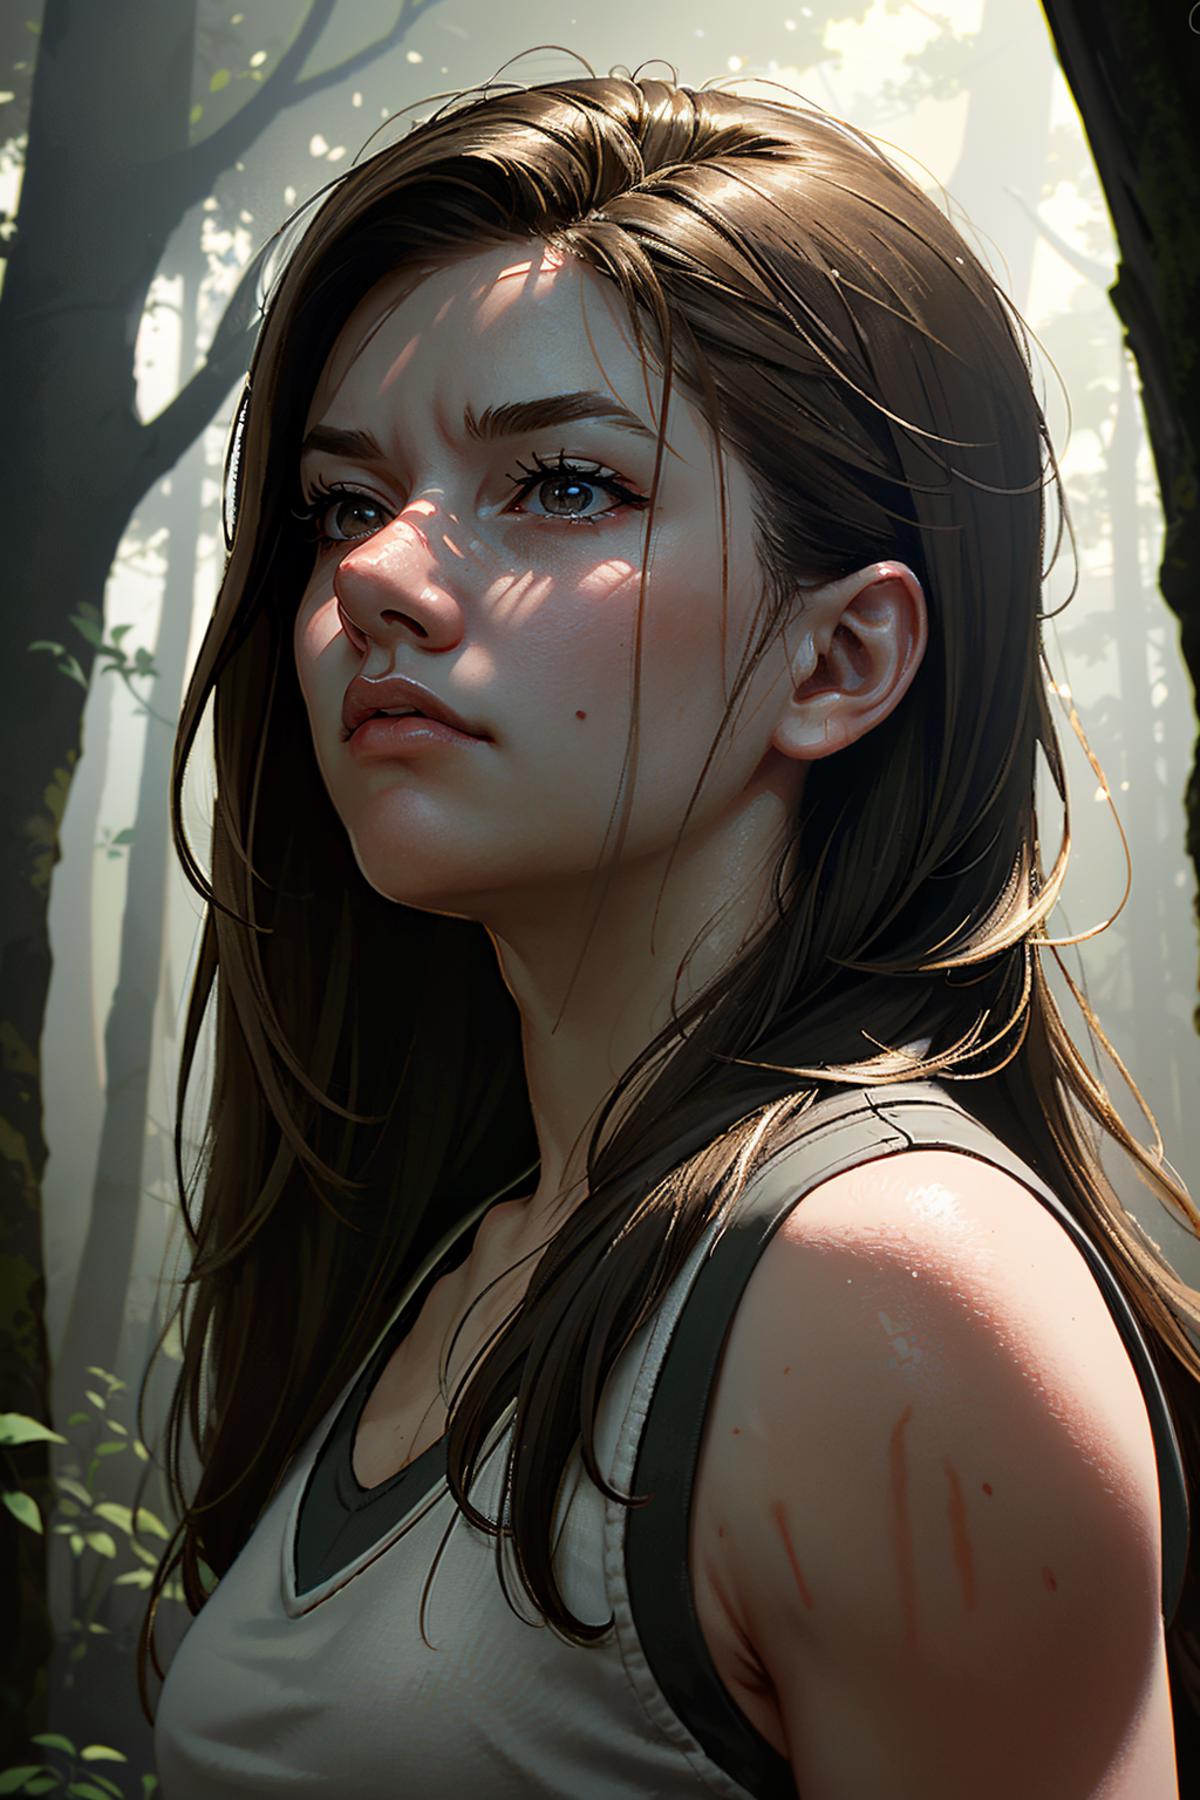 Abby from The Last of Us 2 image by BloodRedKittie